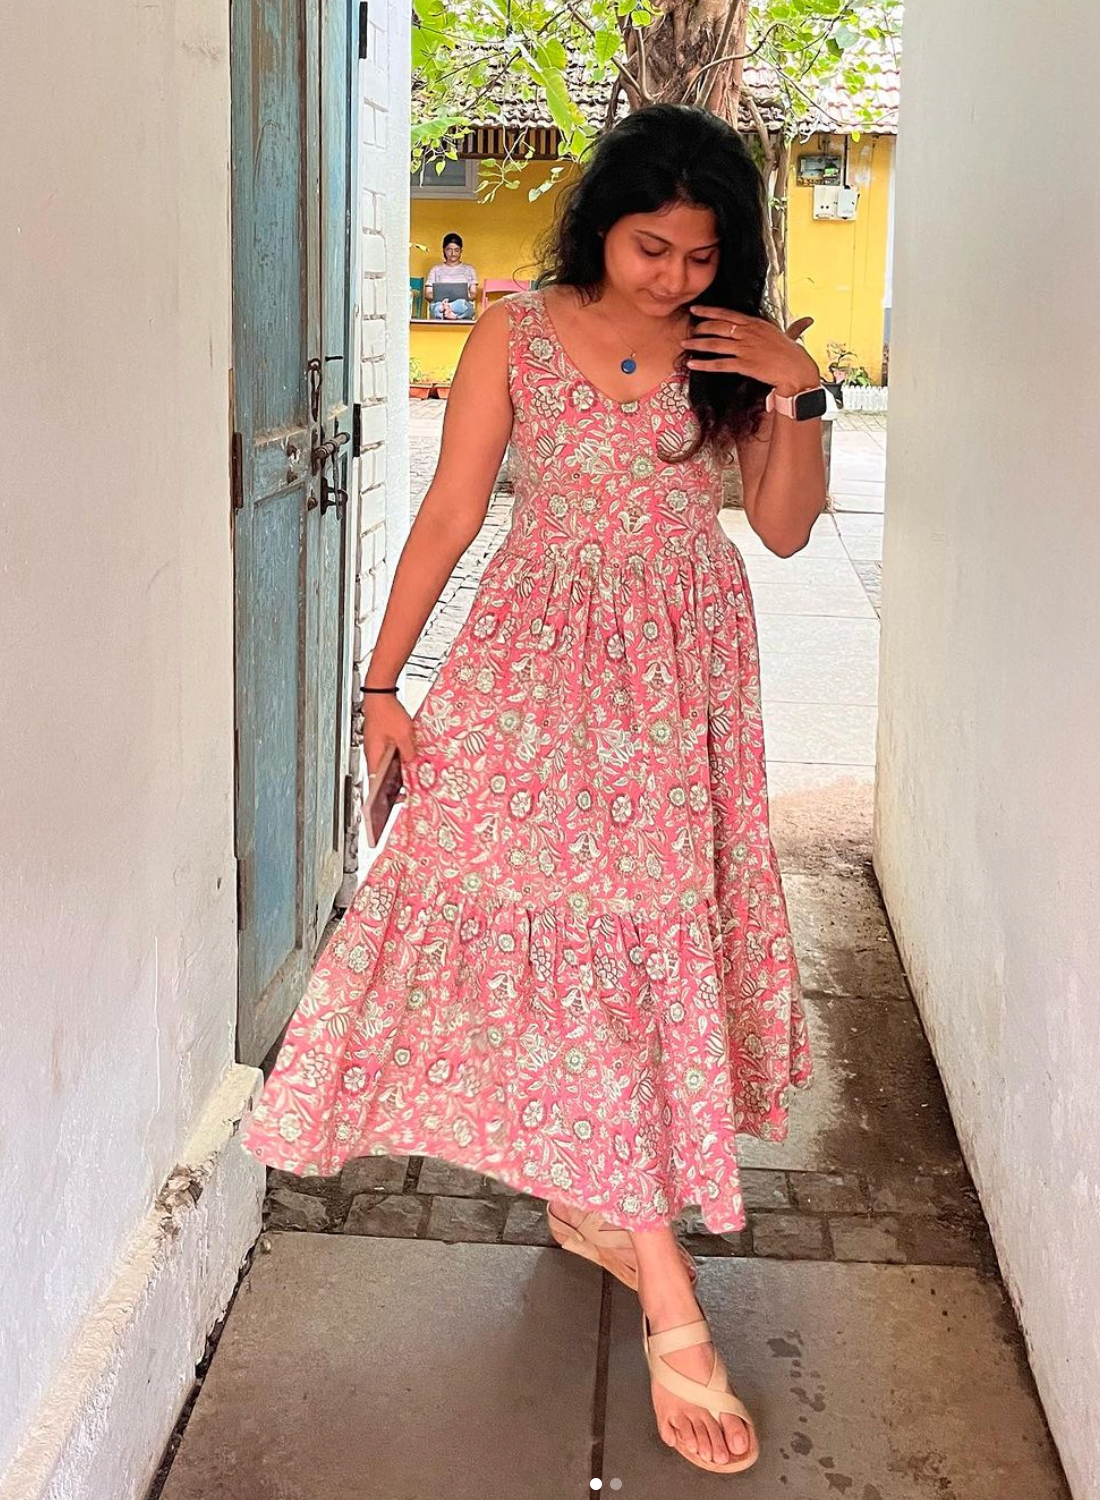 The Authentic Floral Dress